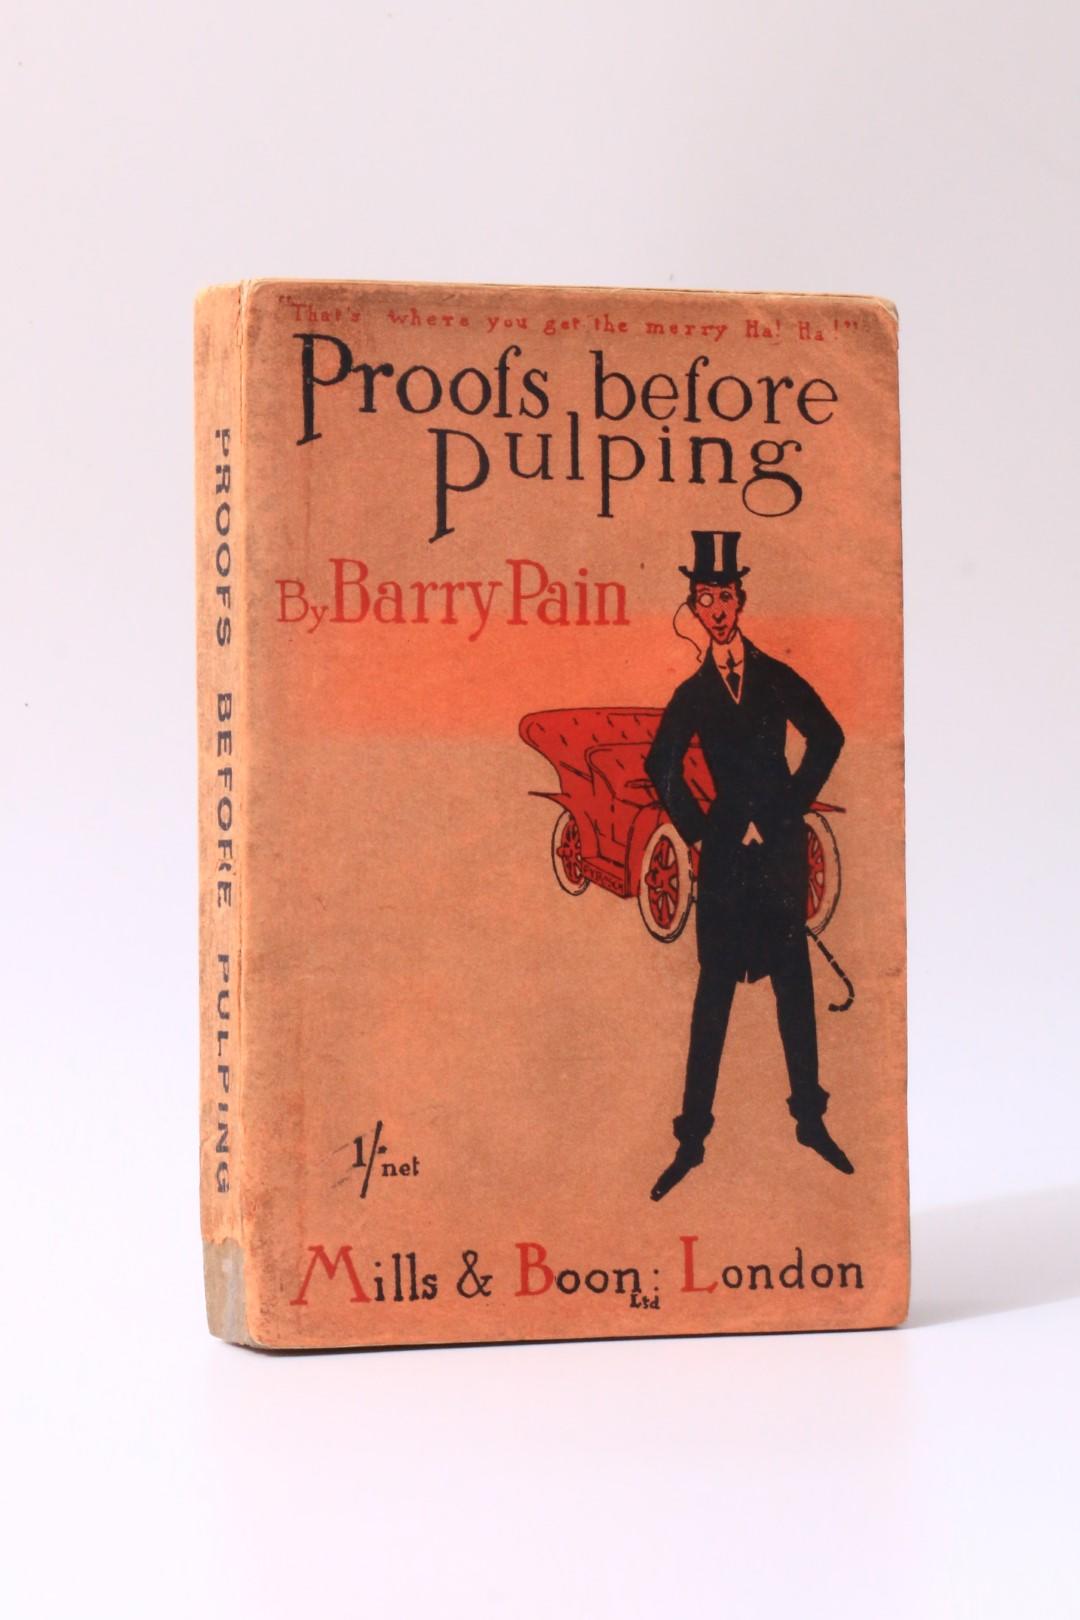 Barry Pain - Proofs Before Pulping - Mills & Boon, 1909, First Edition.